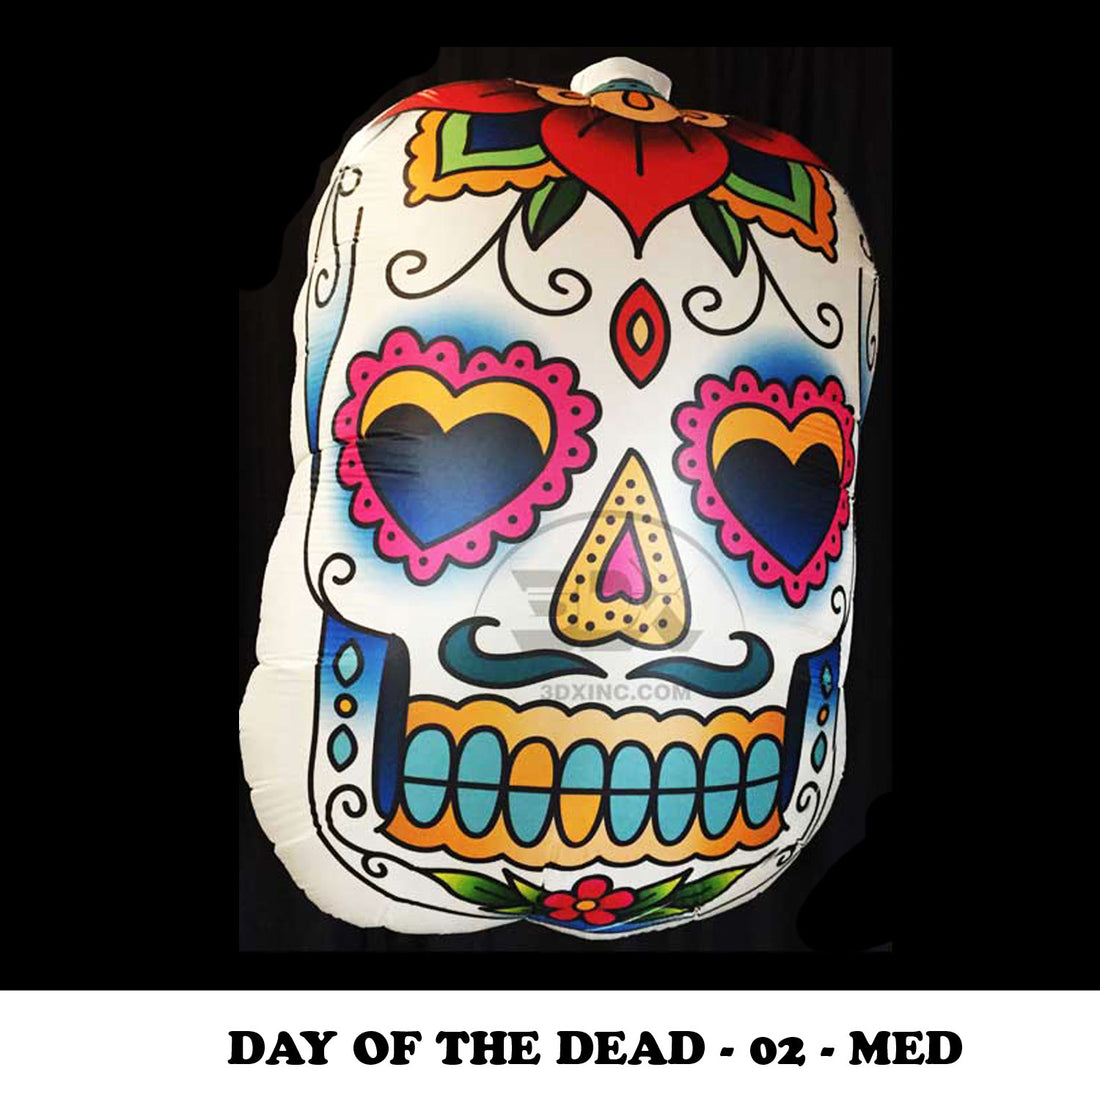 DAY OF THE DEAD - 02 - MED